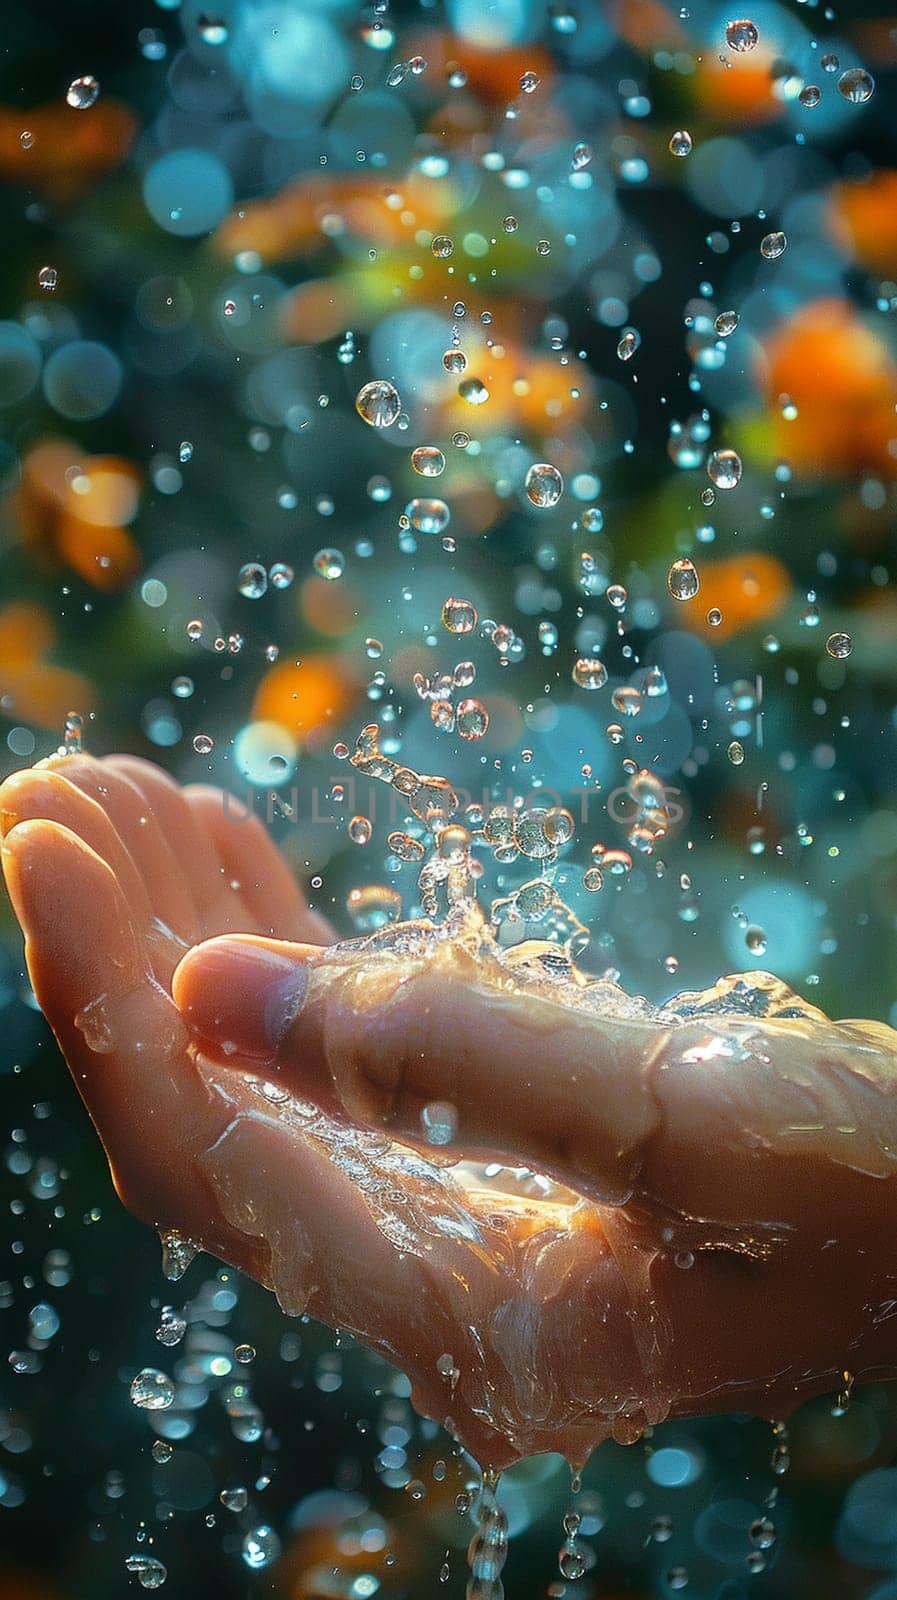 Hand reaching out to touch raindrops, depicting curiosity and interaction with nature.